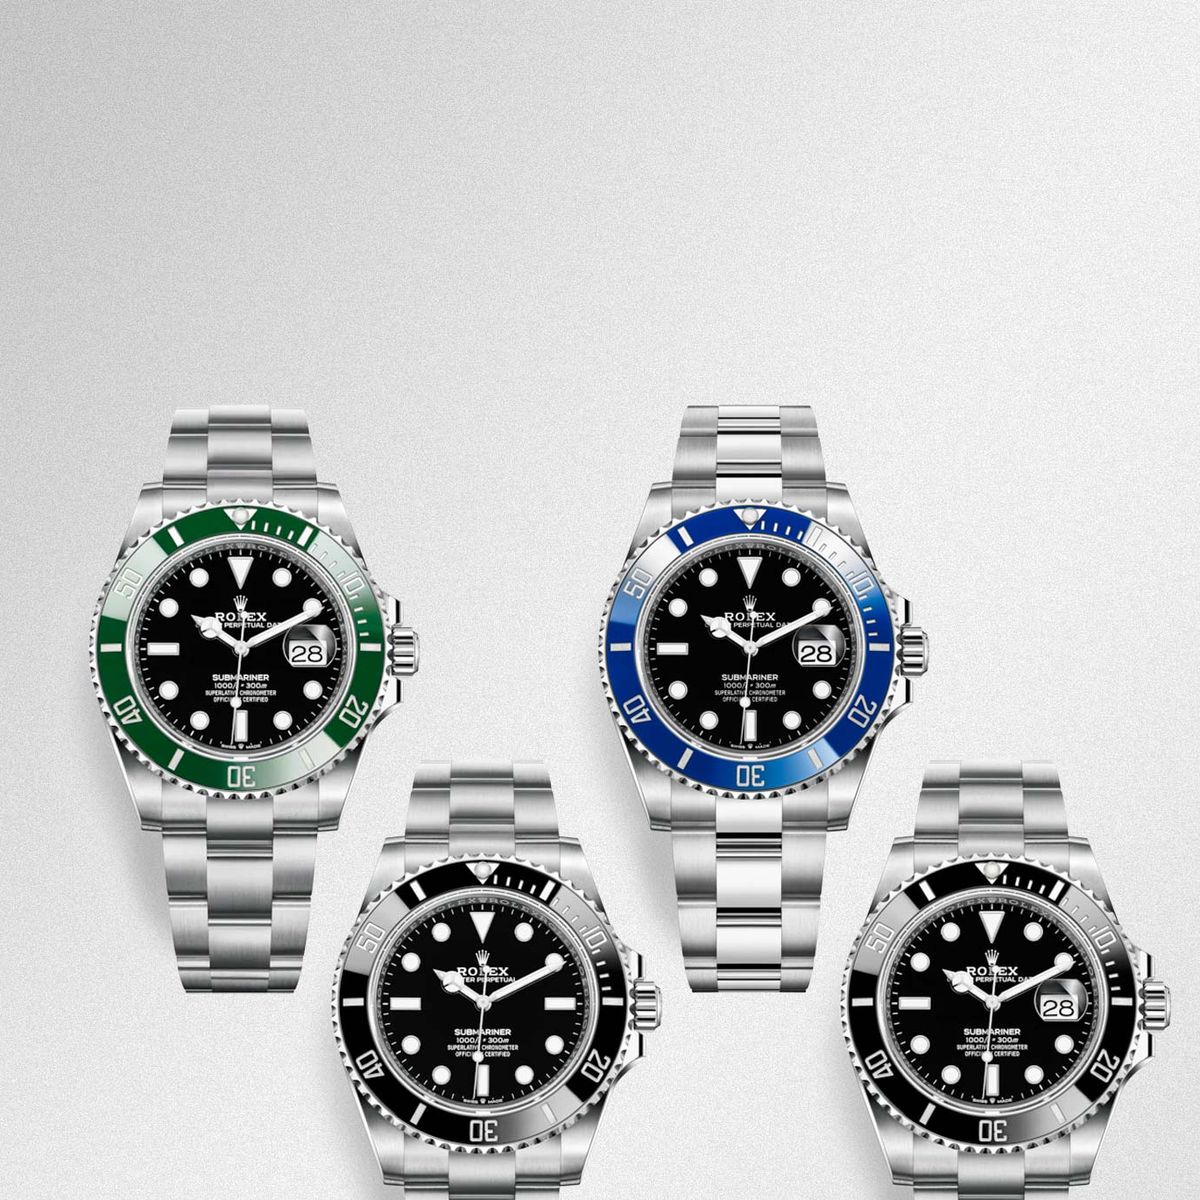 The Definitive Guide to the New 2020 Rolex Submariner - Crown & Caliber Blog